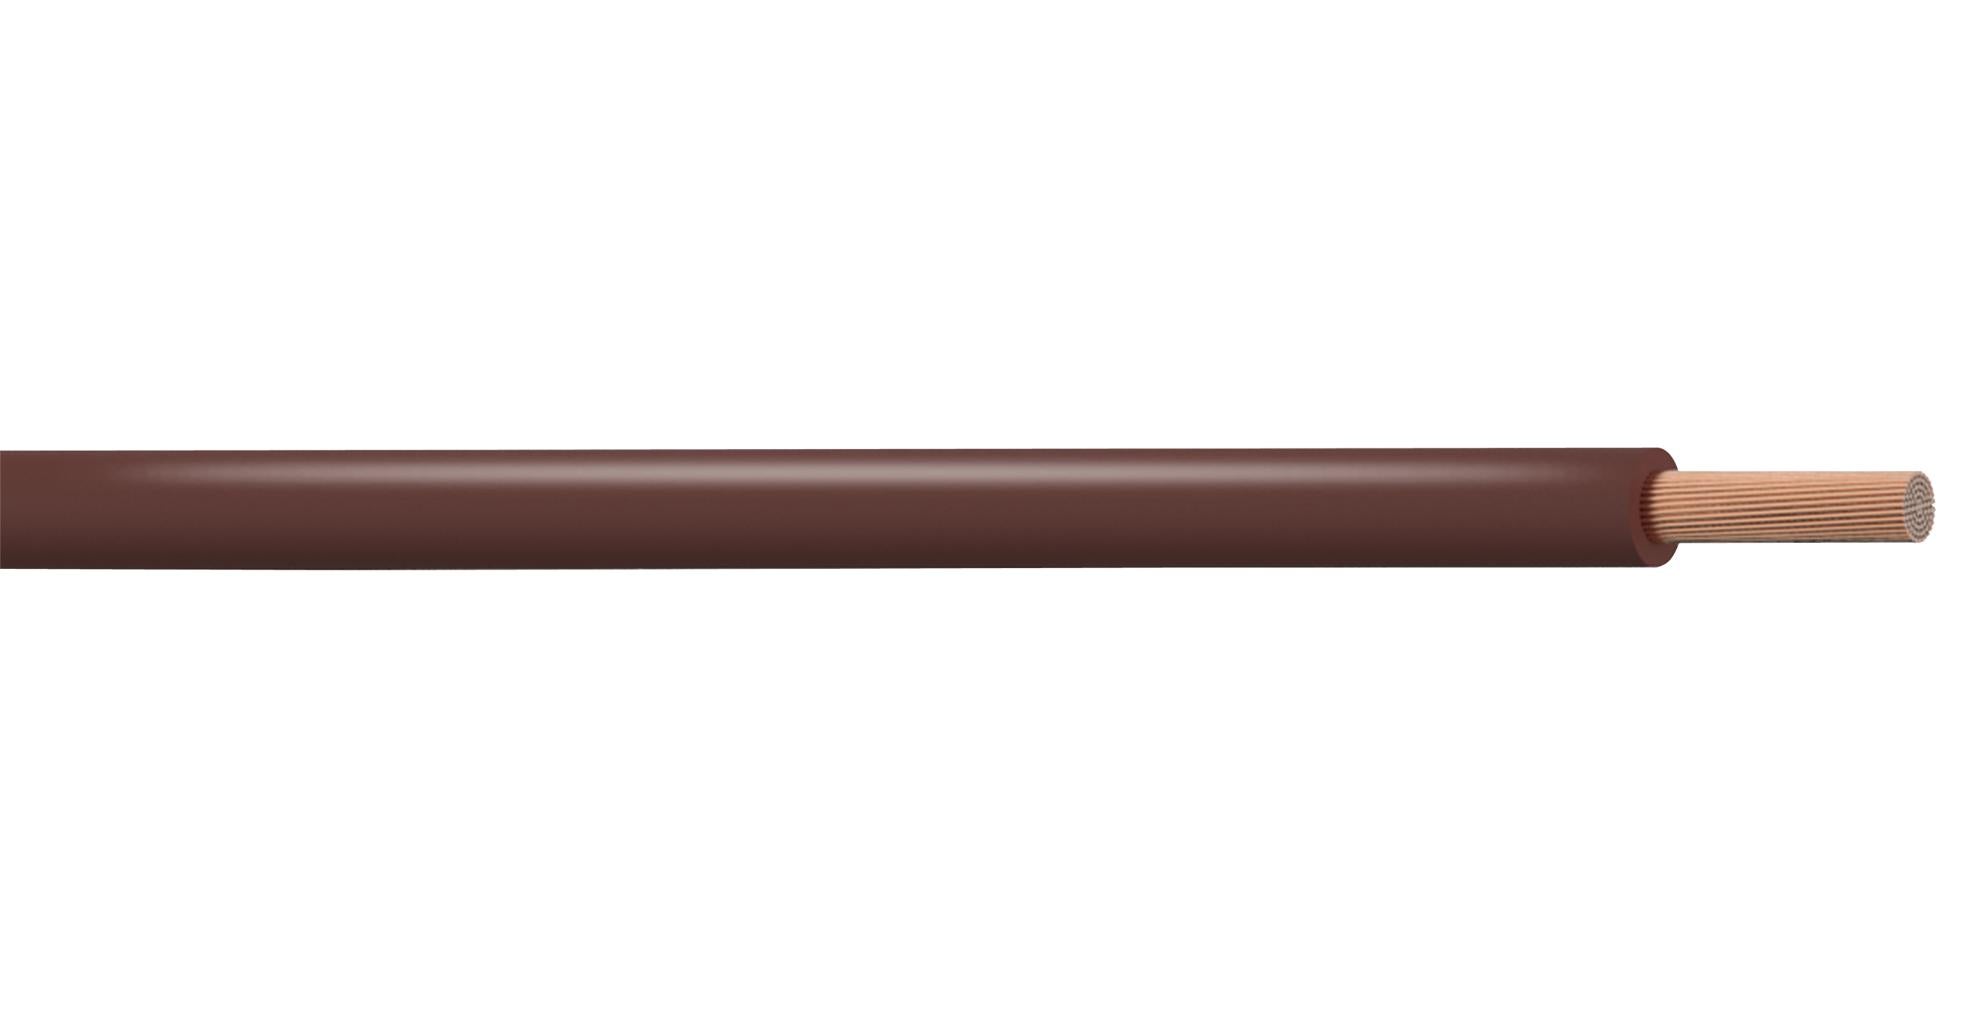 MULTICOMP PRO Single Wire PP001319 TRI RATED WIRE, 1MM2, BROWN, 500M MULTICOMP PRO 2543493 PP001319